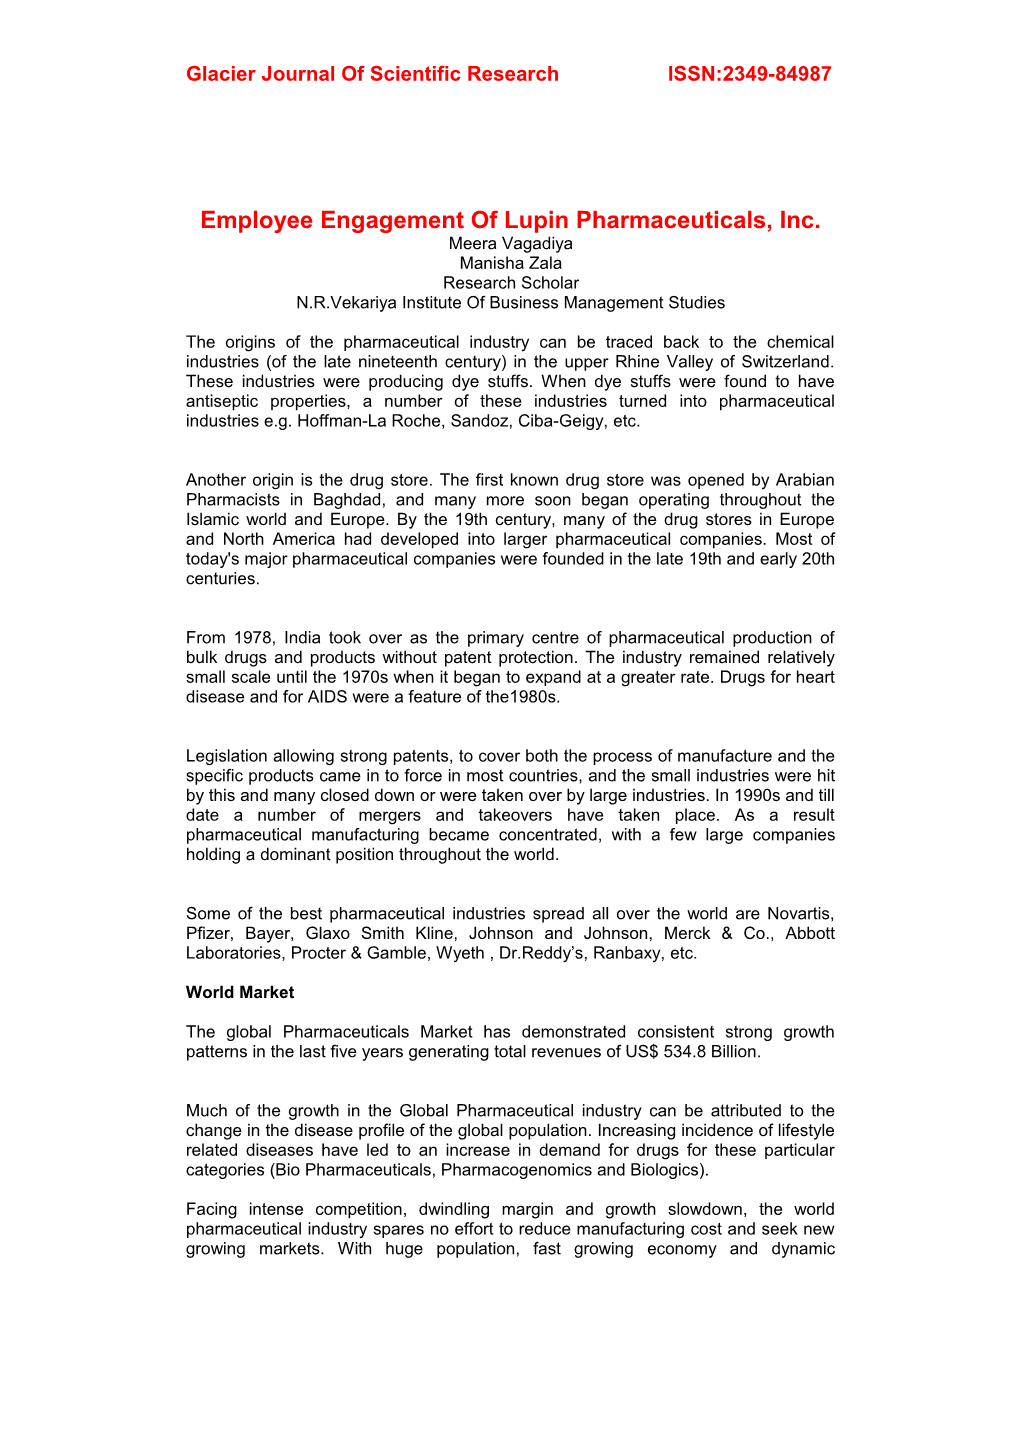 Employee Engagement of Lupin Pharmaceuticals, Inc